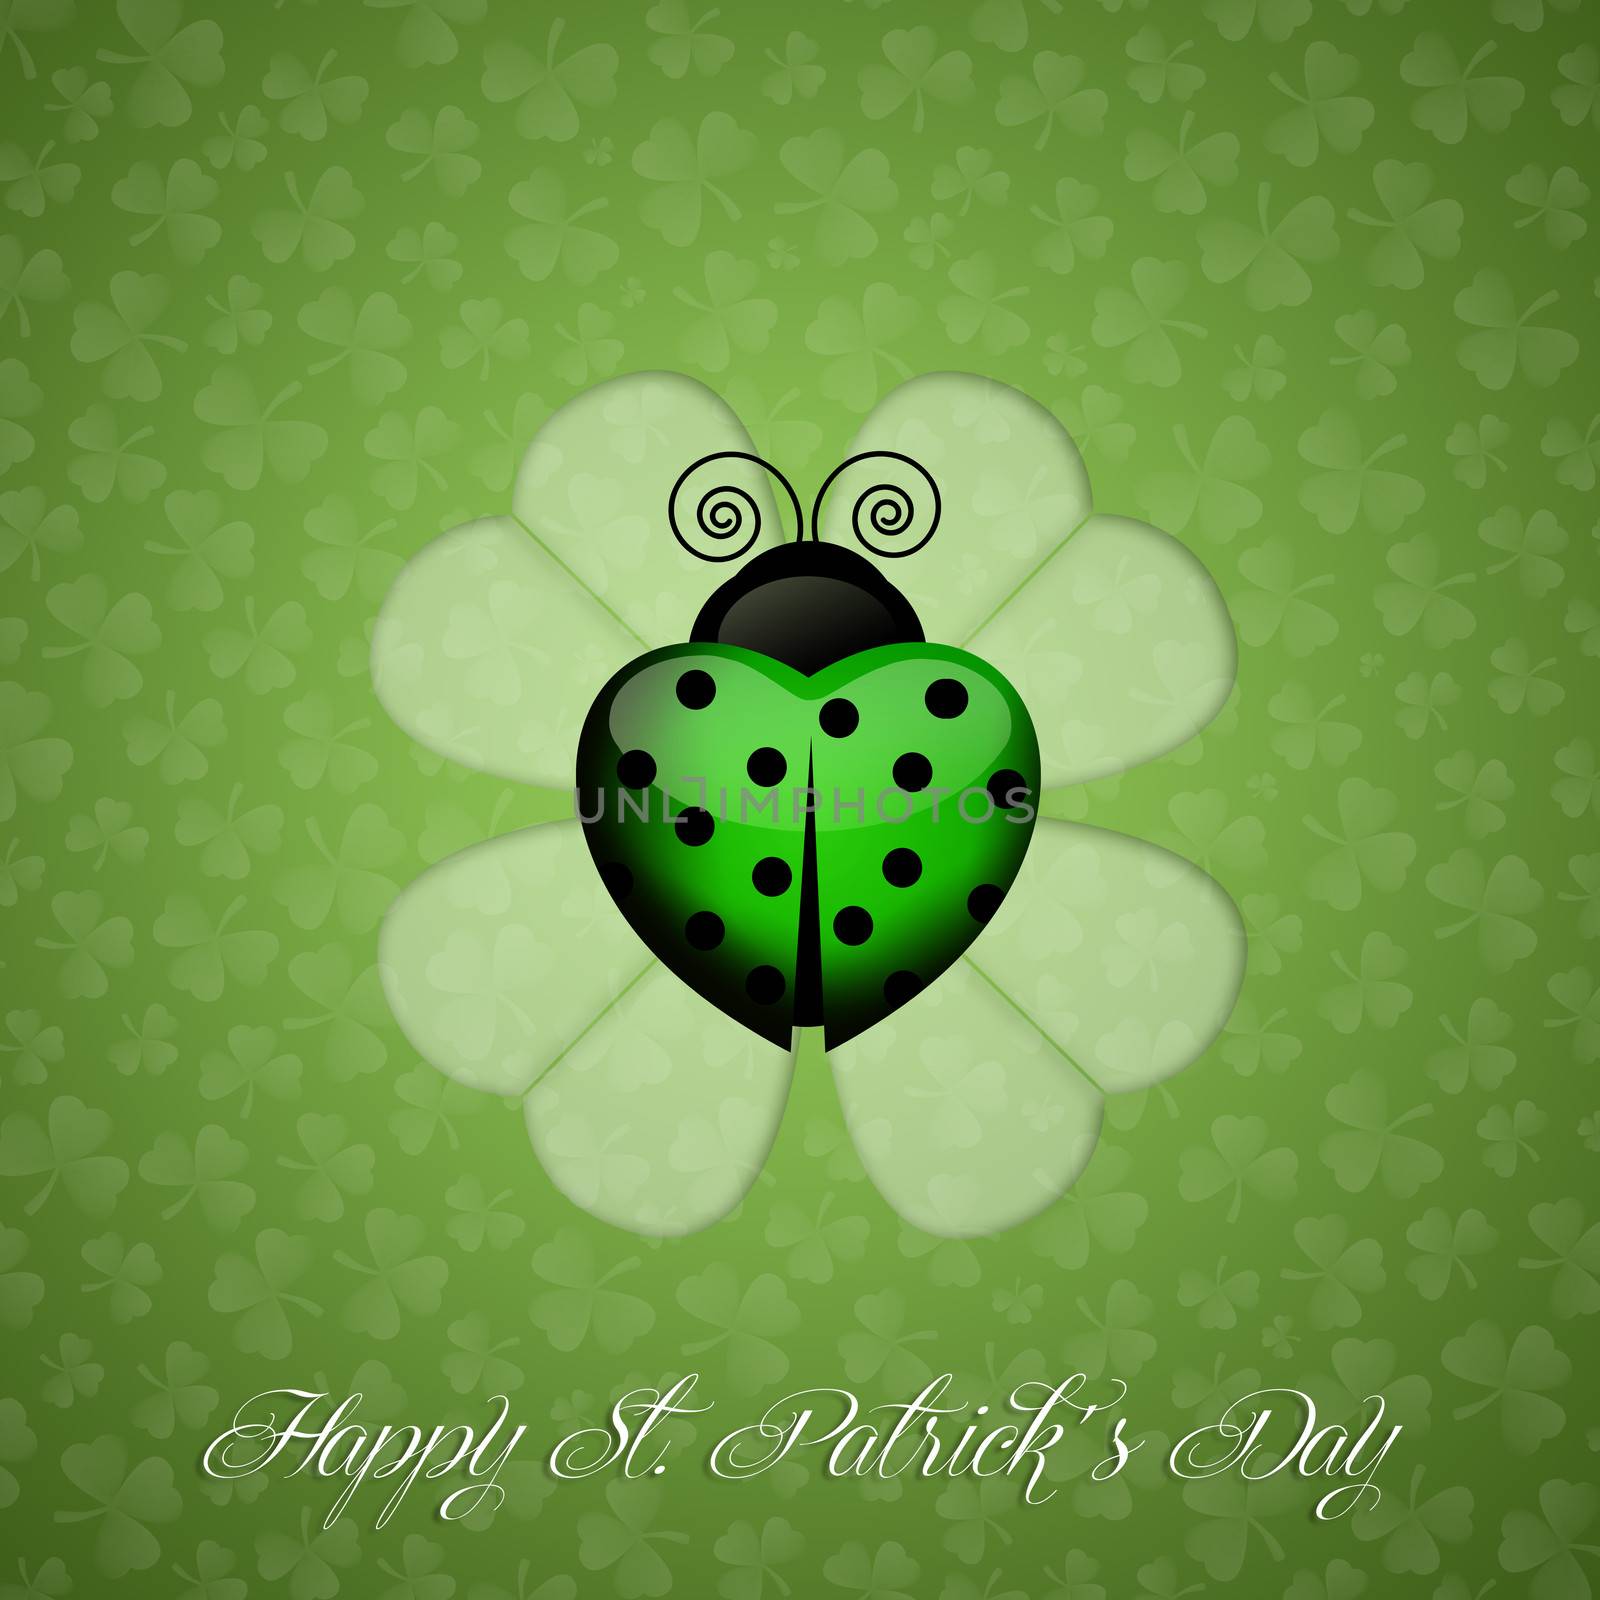 Happy St. Patrick's Day by sognolucido